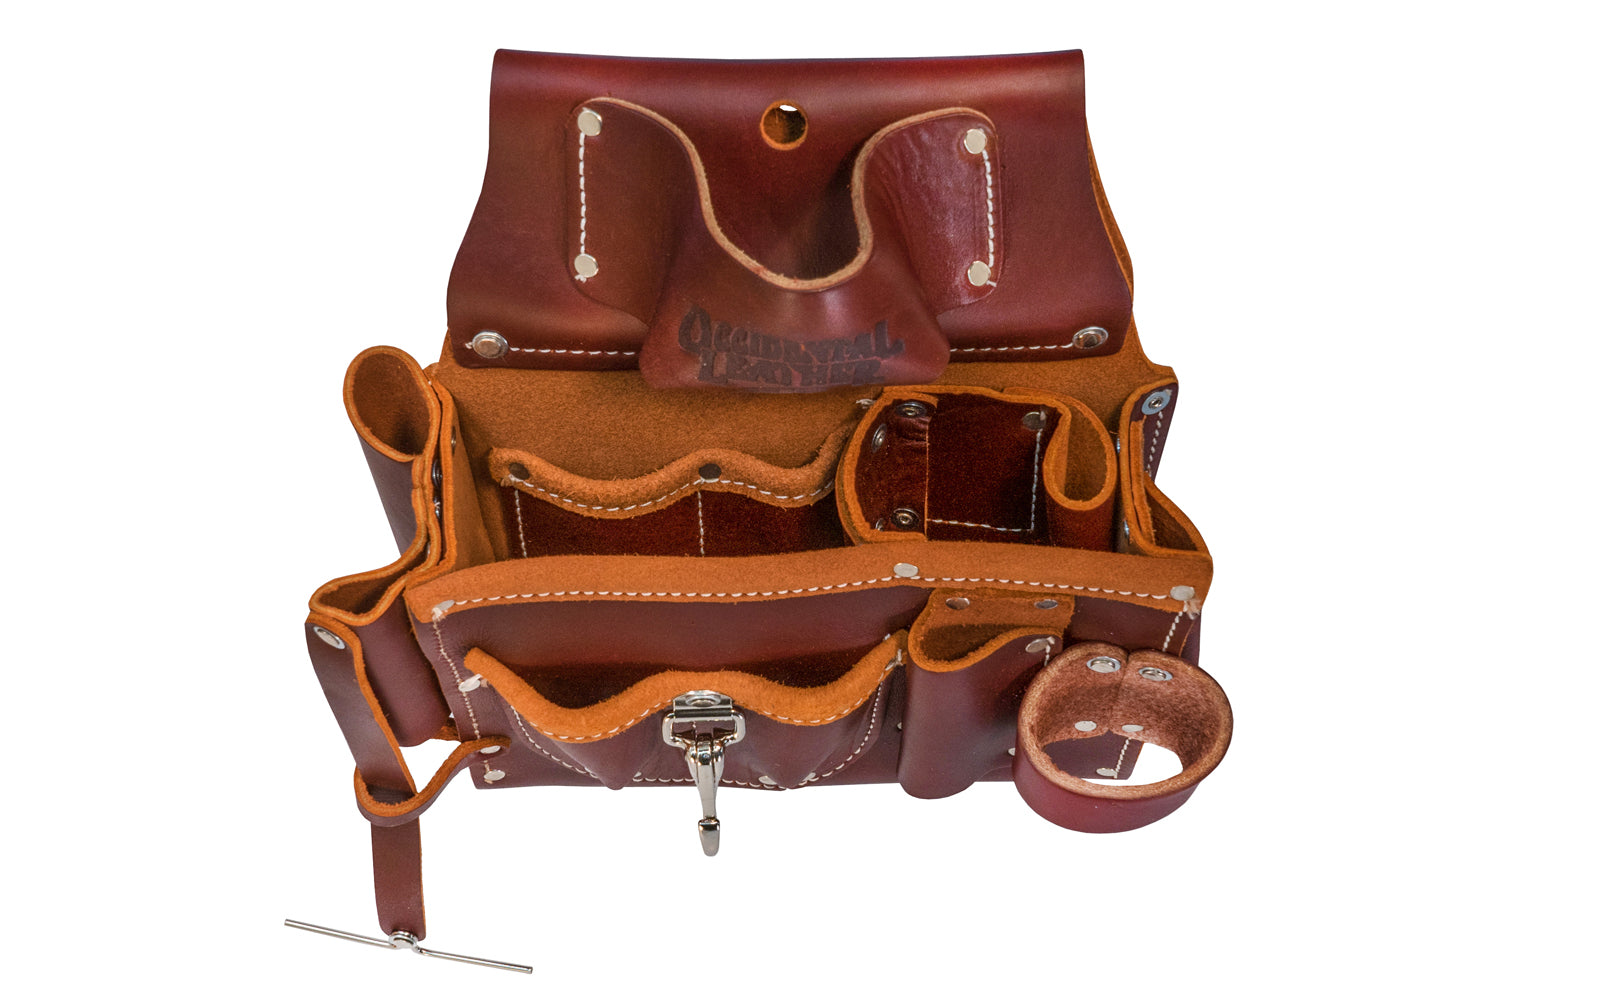 Occidental Leather Dr. Wood Tool Case – the Ultimate Tool Bag?